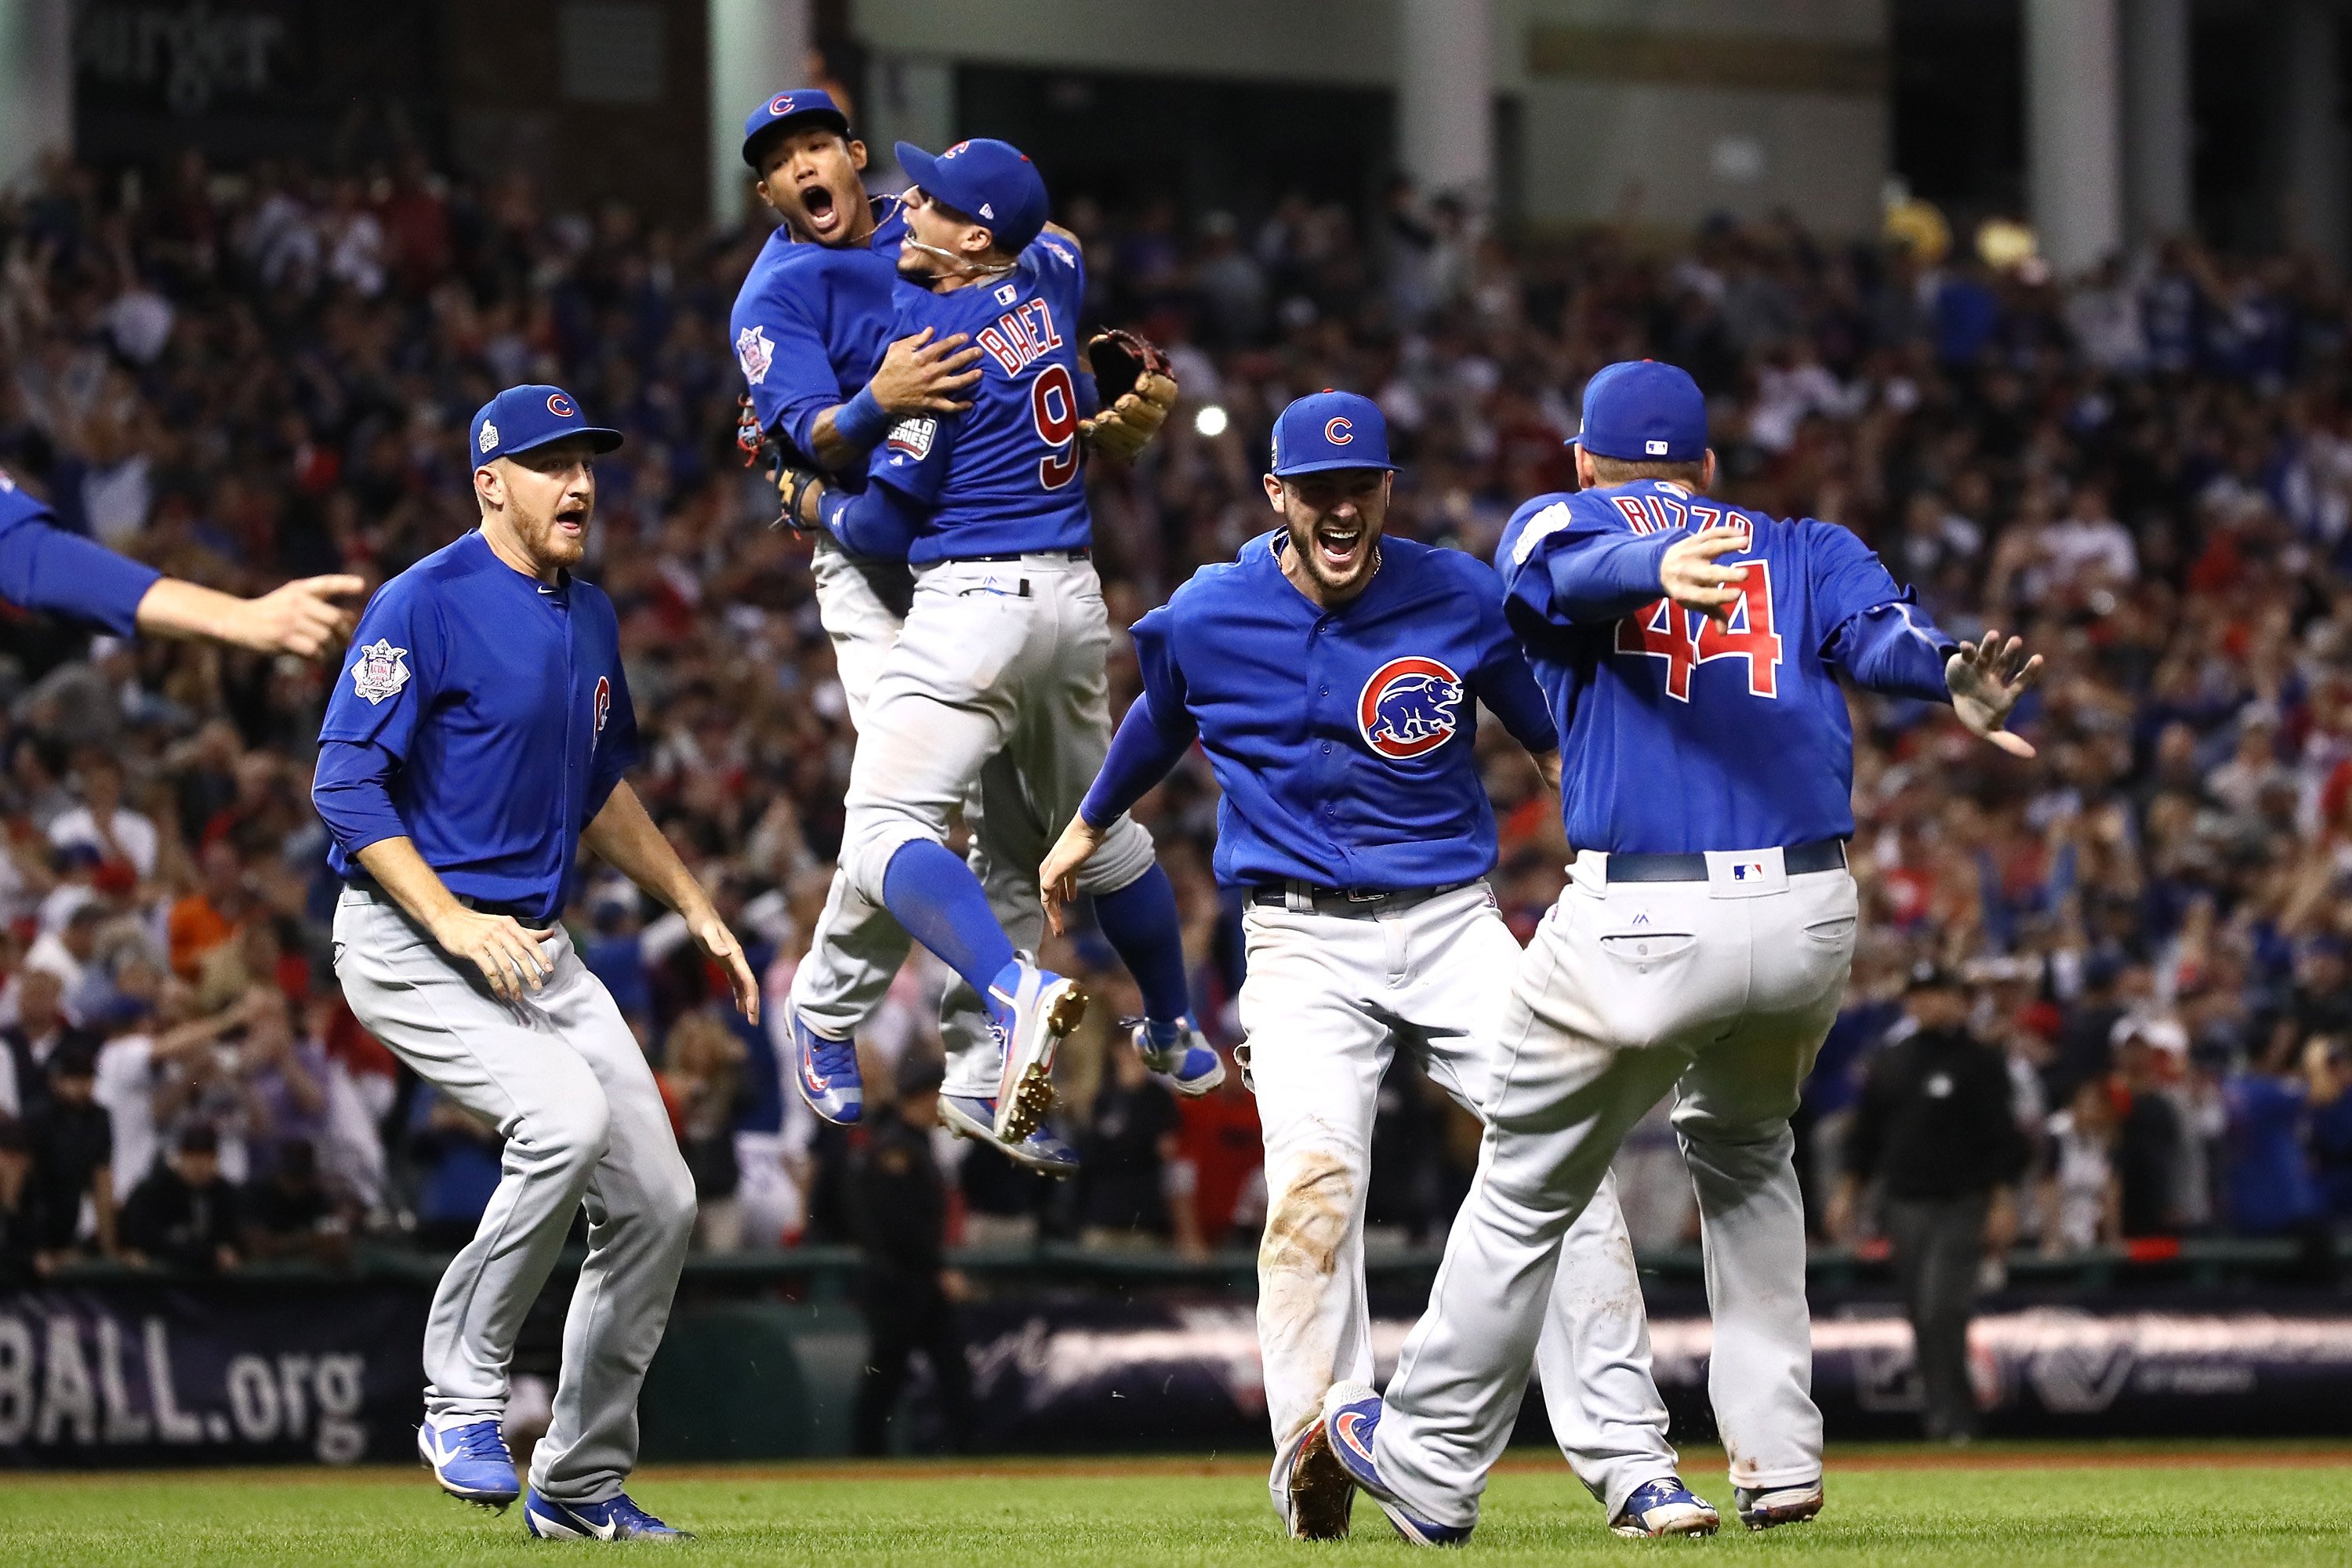 The Chicago Cubs celebrate after defeating the Cleveland Indians  8-7 in Game 7 to win baseball's 2016 World Series at Progressive Field on Nov. 3, 2016 in Cleveland. (Ezra Shaw—Getty Images)